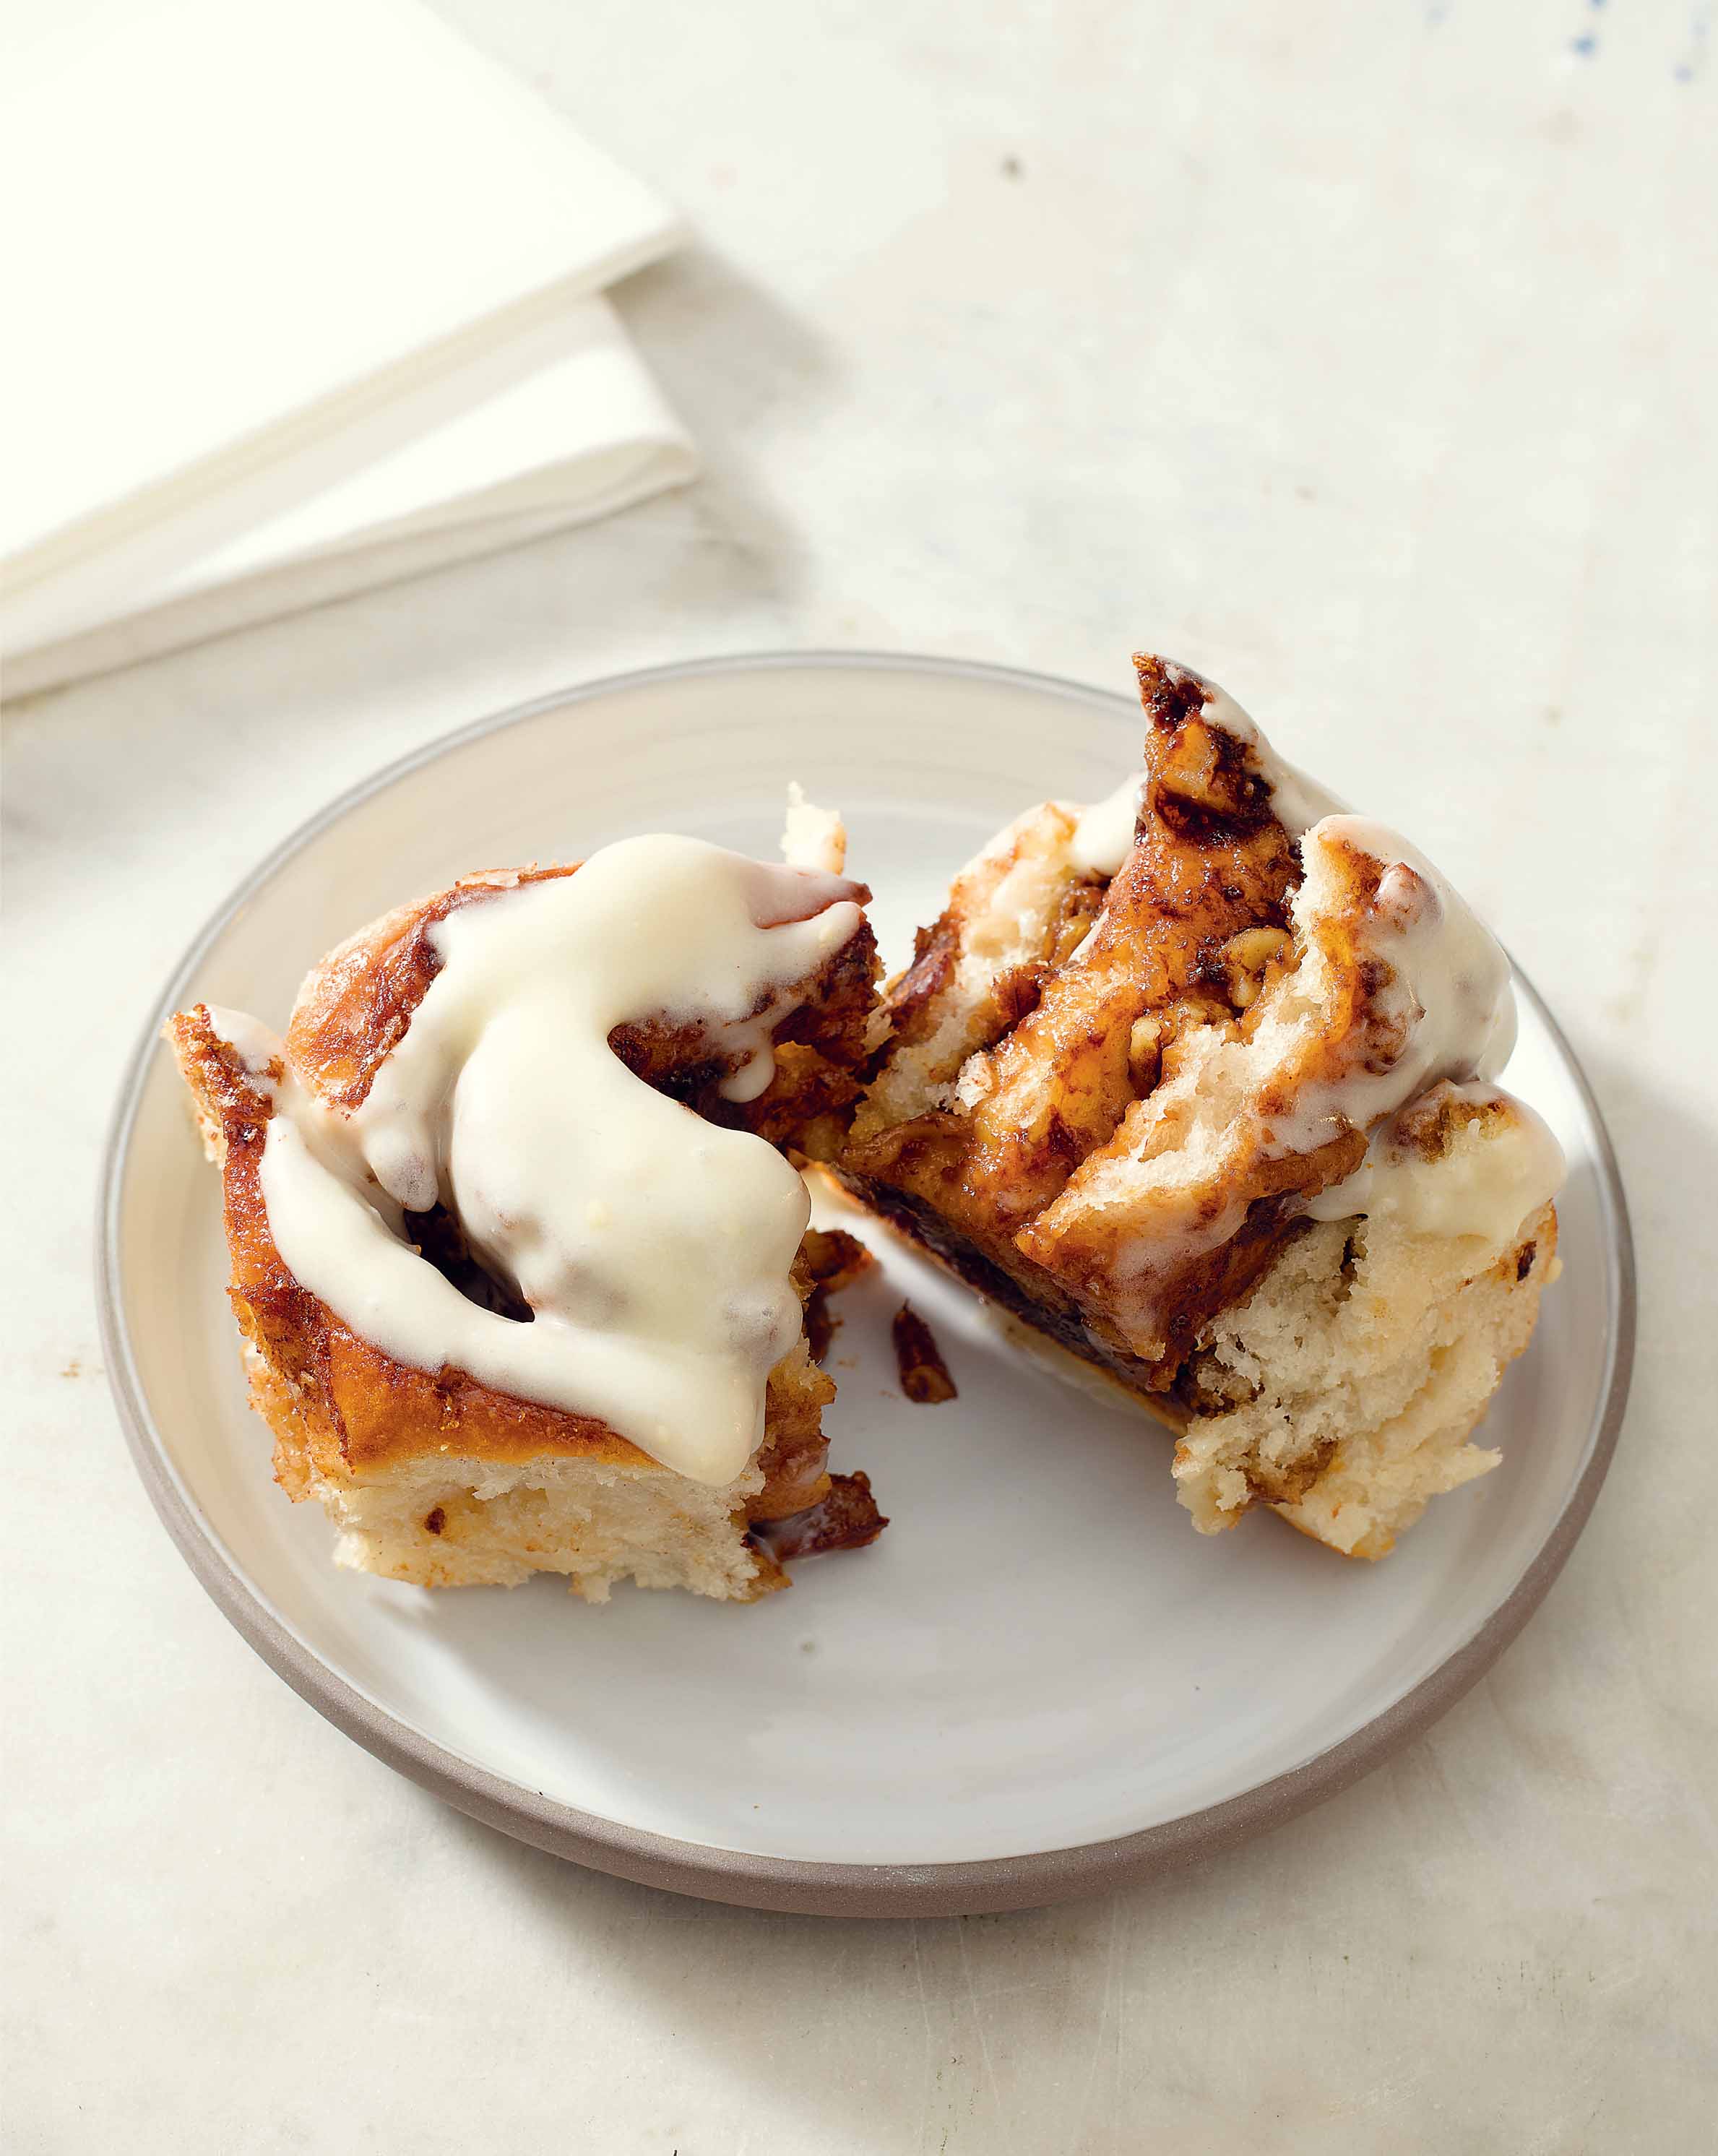 Pecan cinnamon rolls with cream cheese frosting